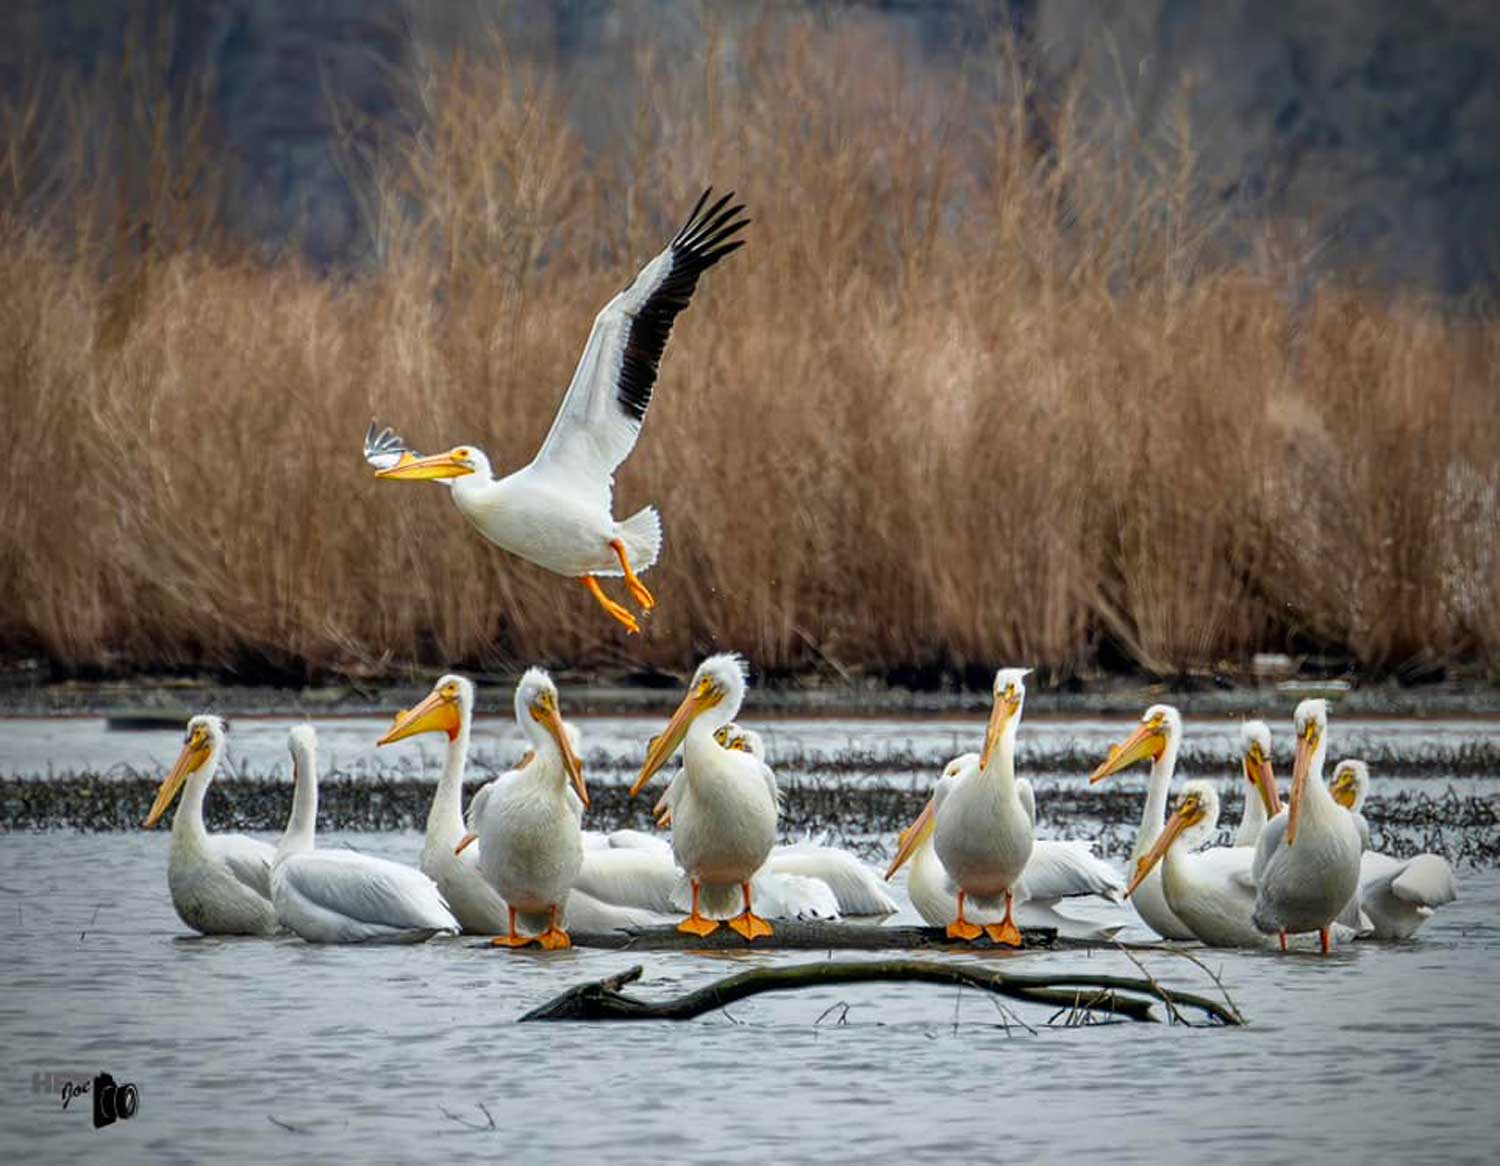 A group of pelicans standing atop rocks in a river.